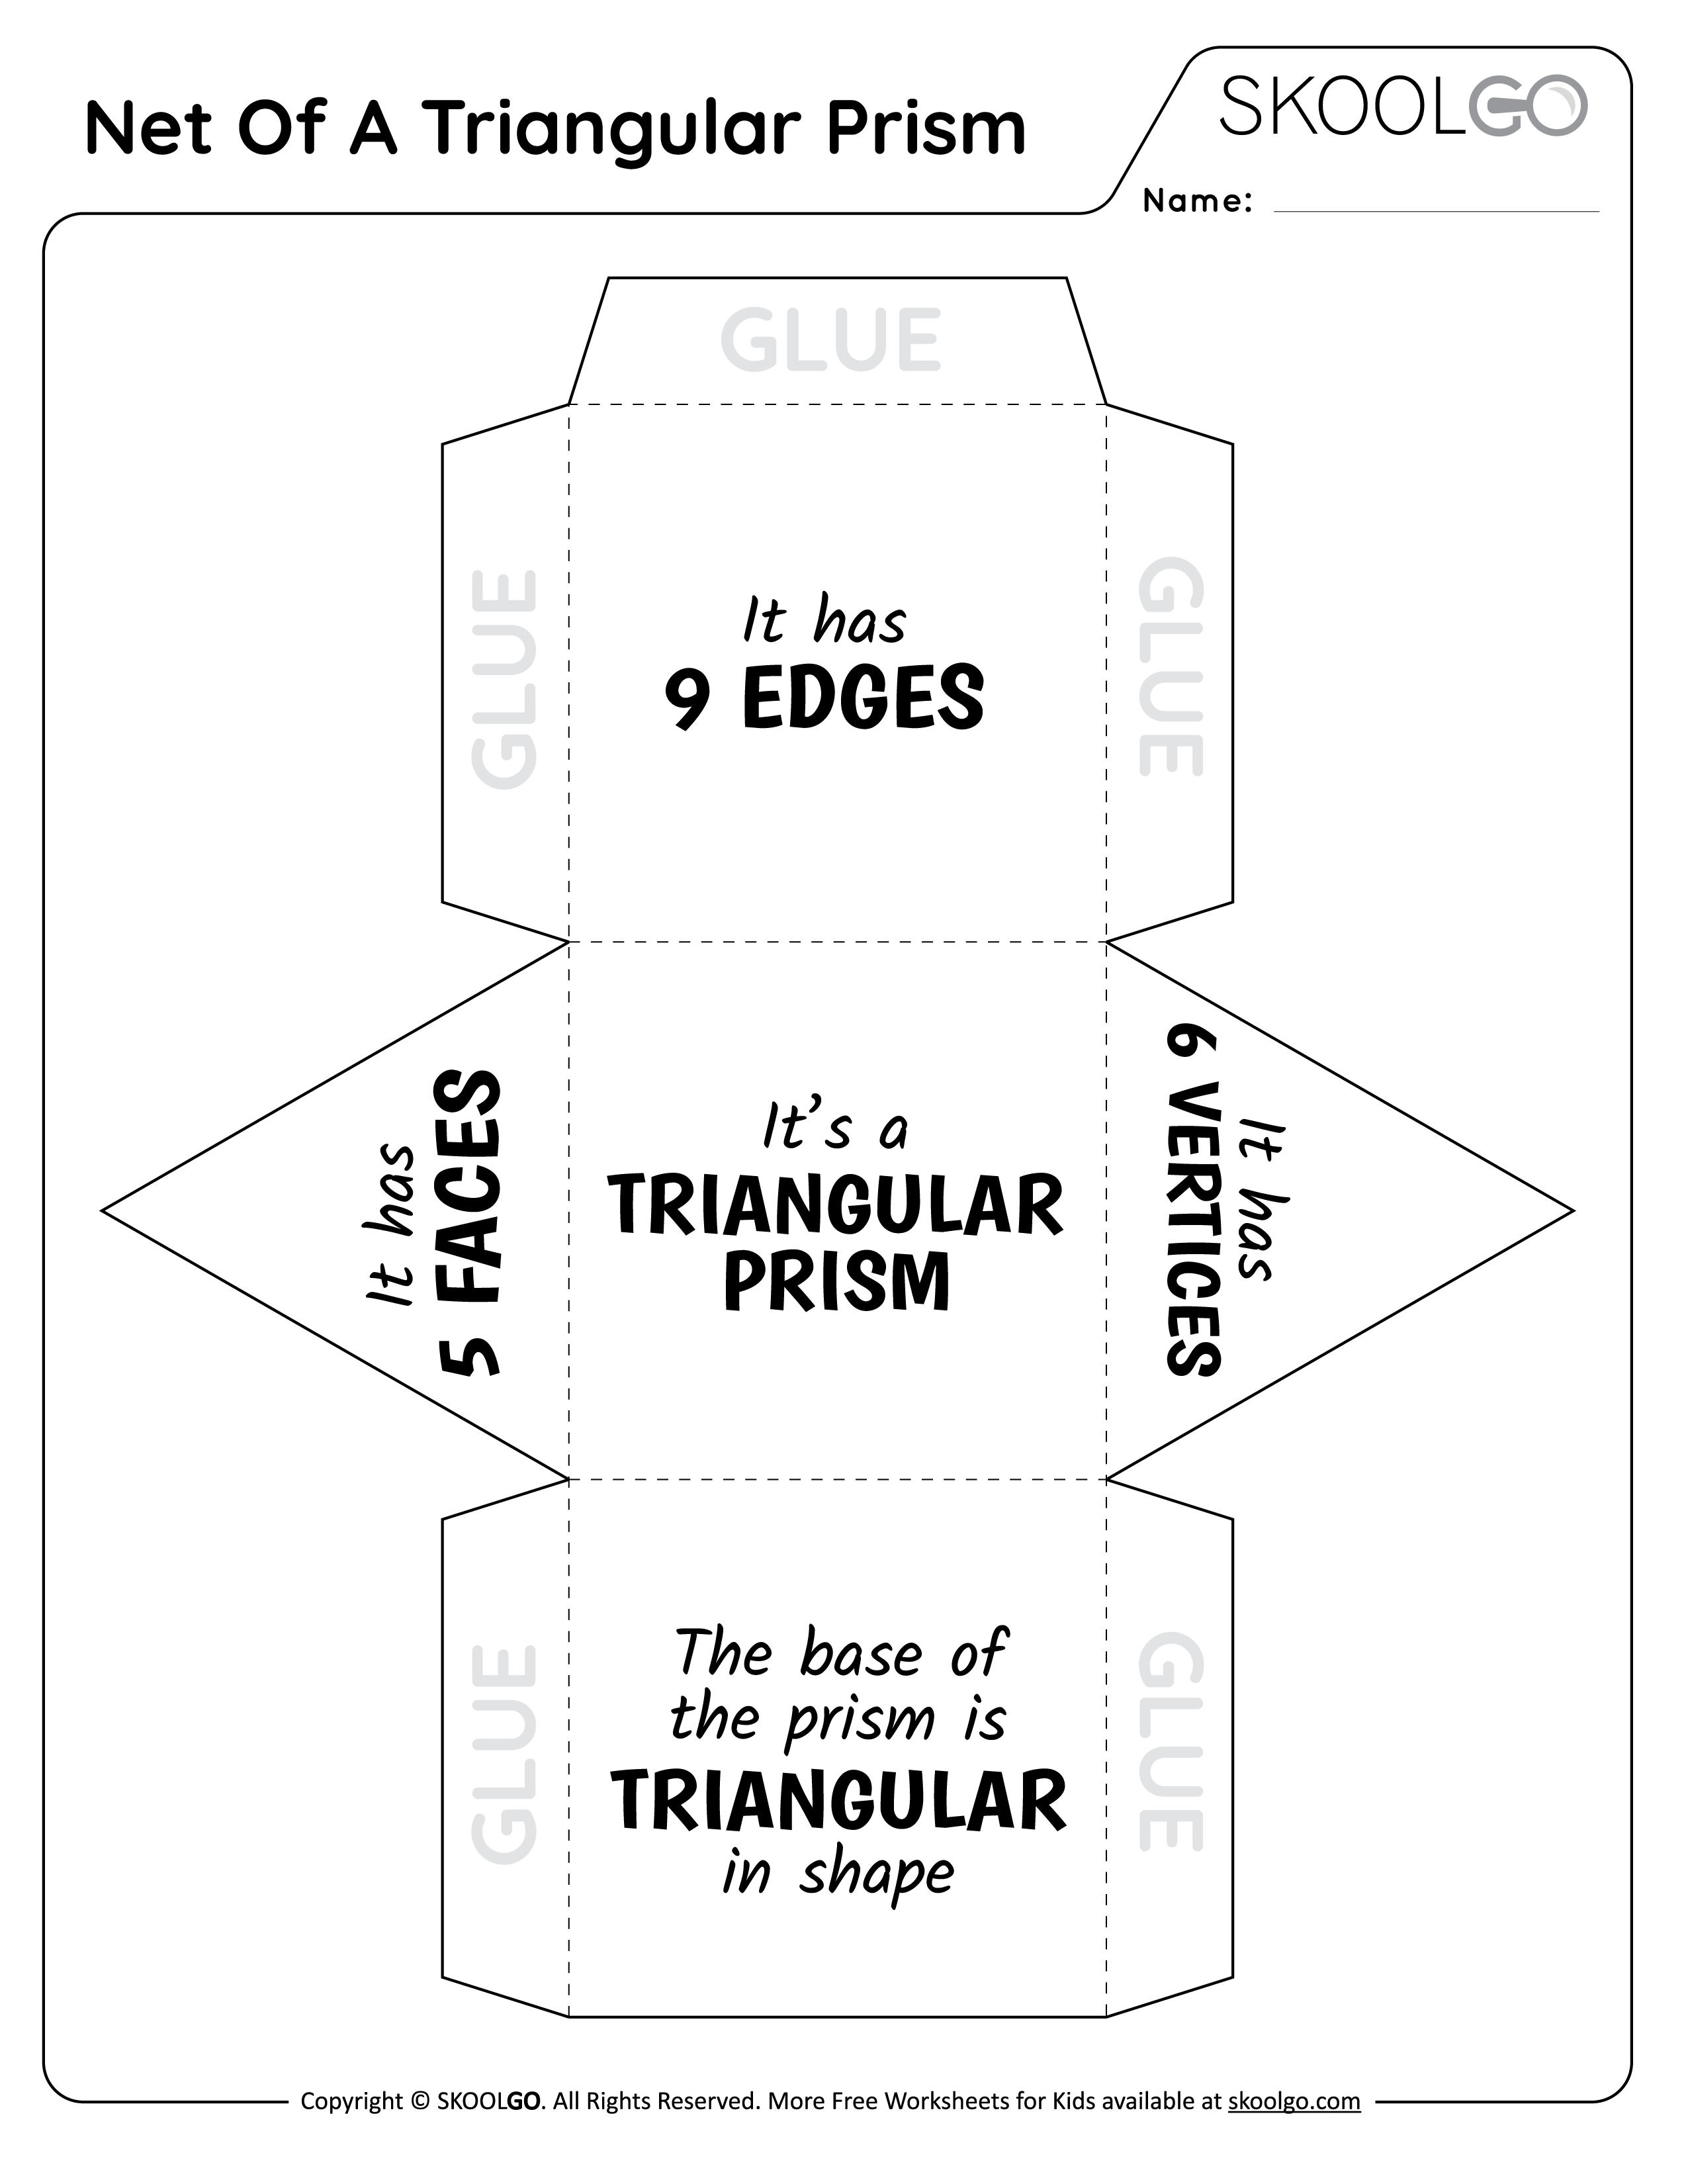 Net Of A Triangular Prism - Free Worksheet for Kids - Black and White